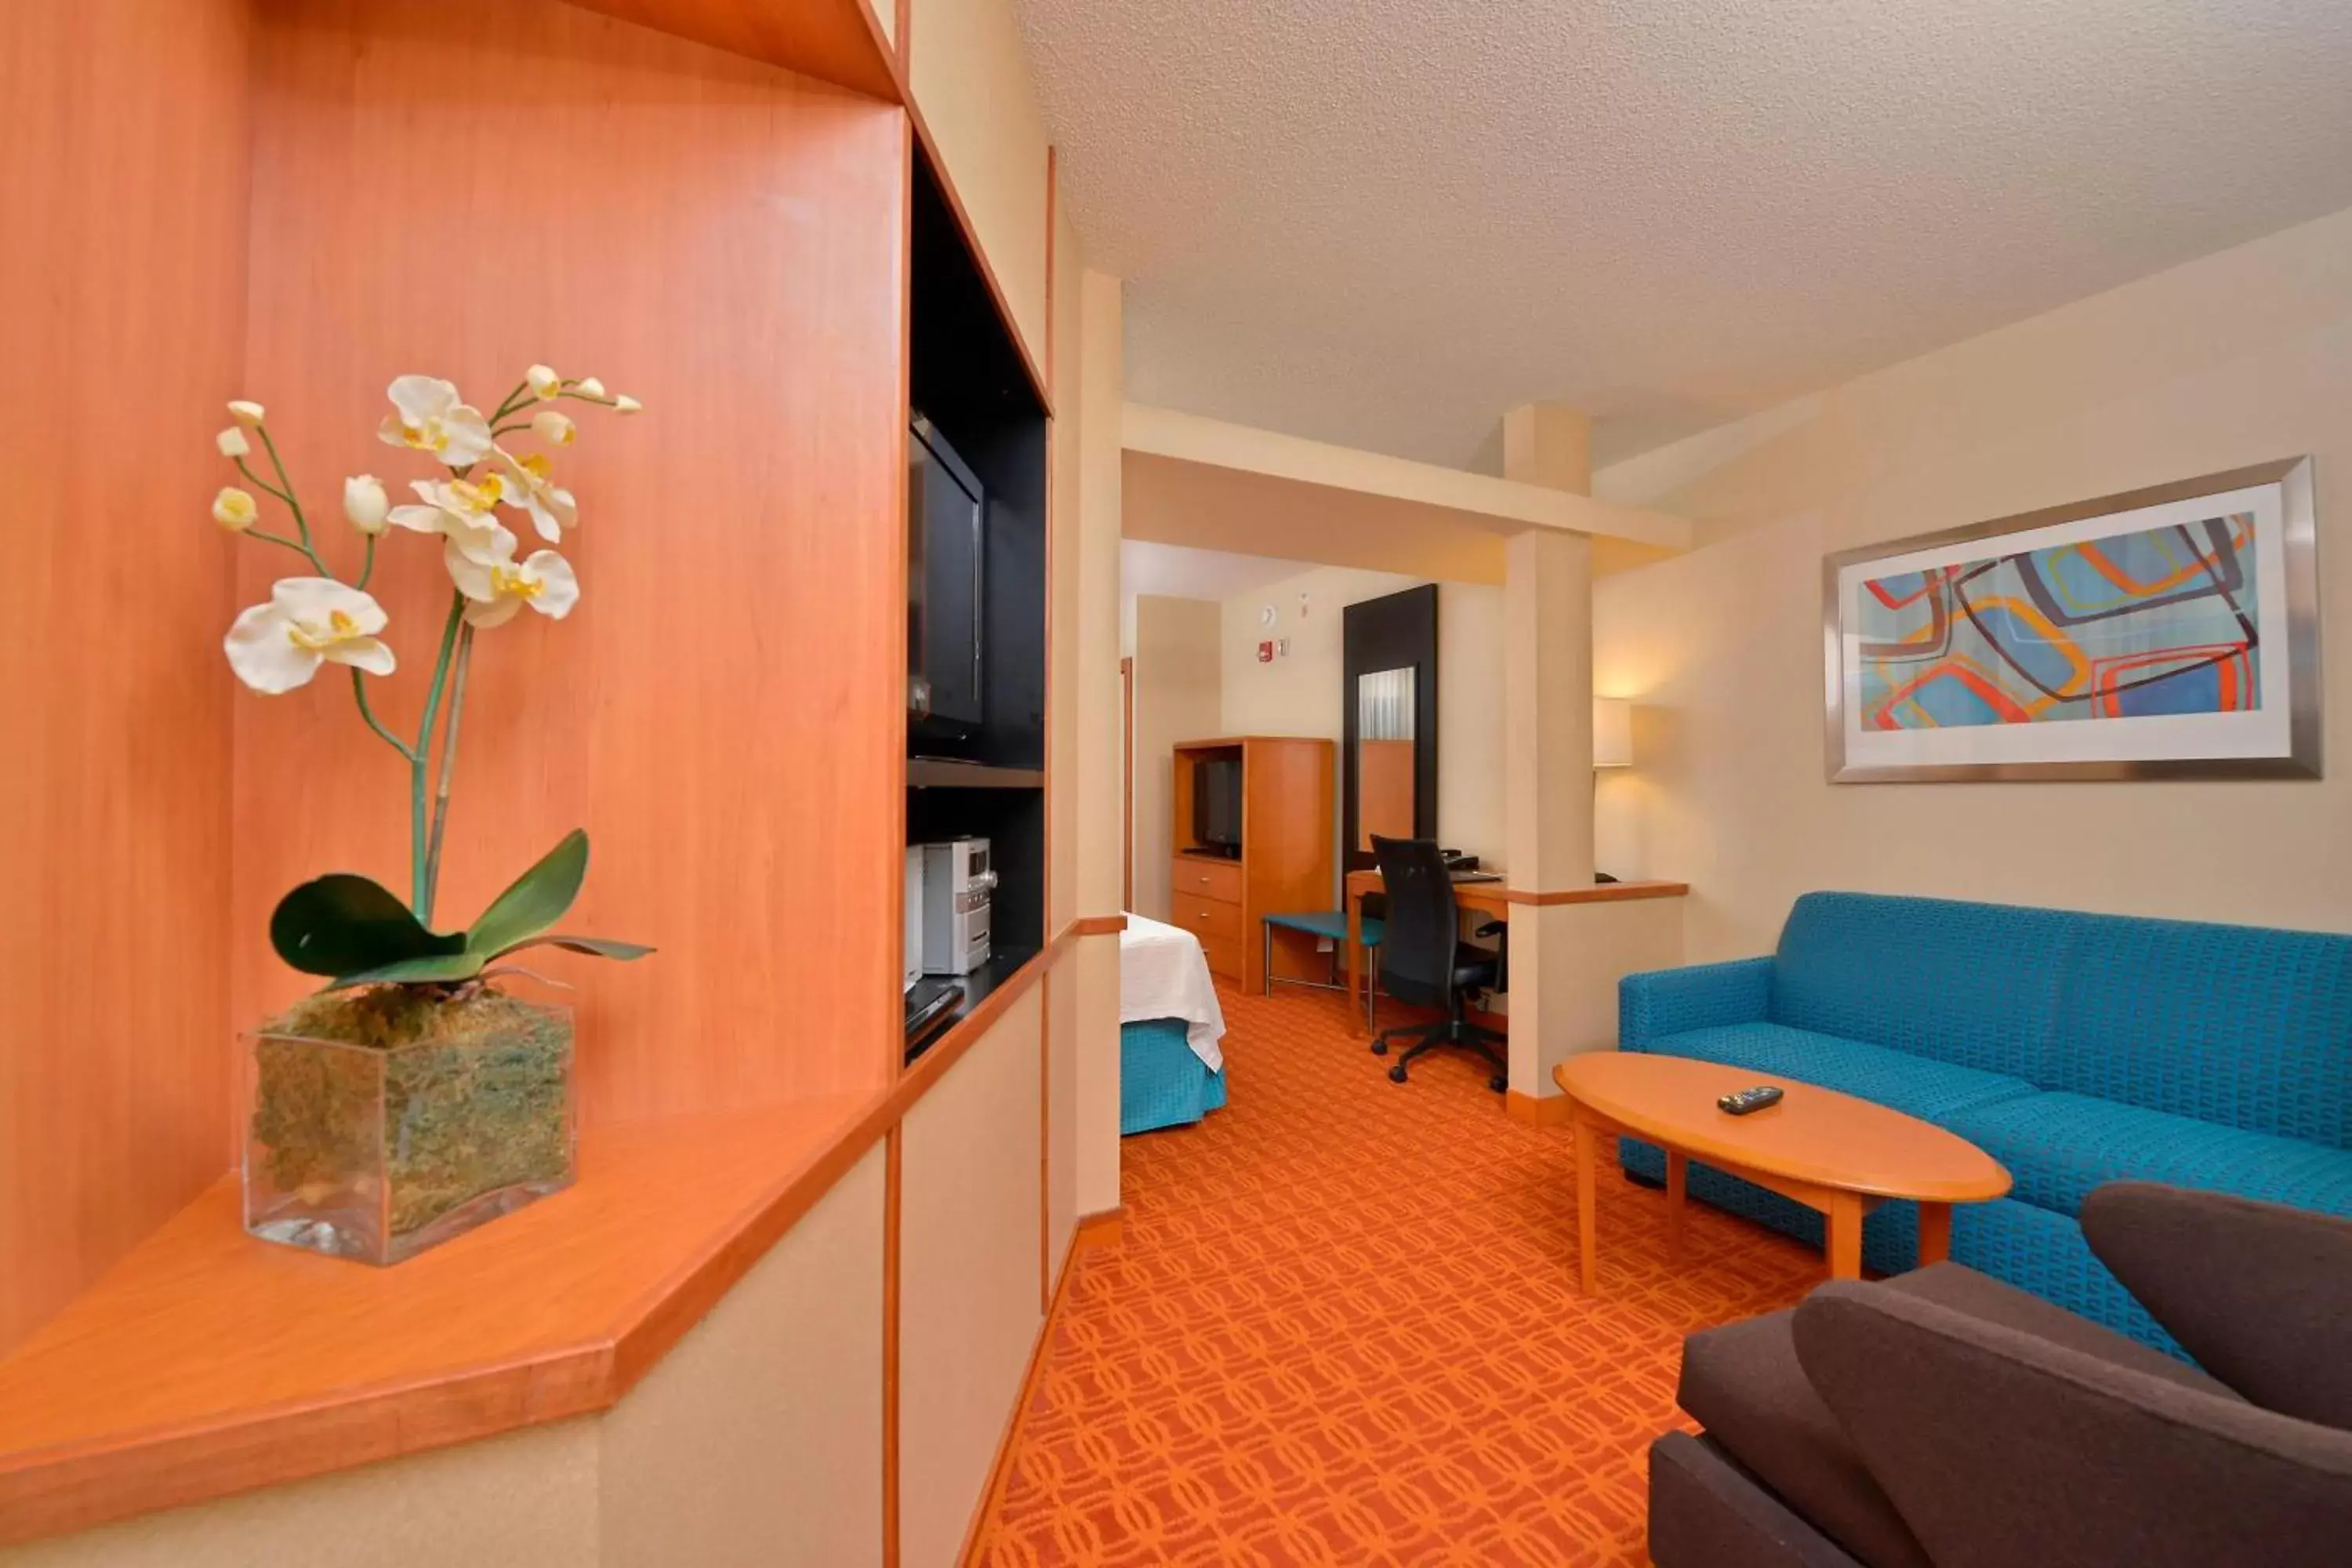 Living room in Fairfield Inn and Suites by Marriott Williamsport